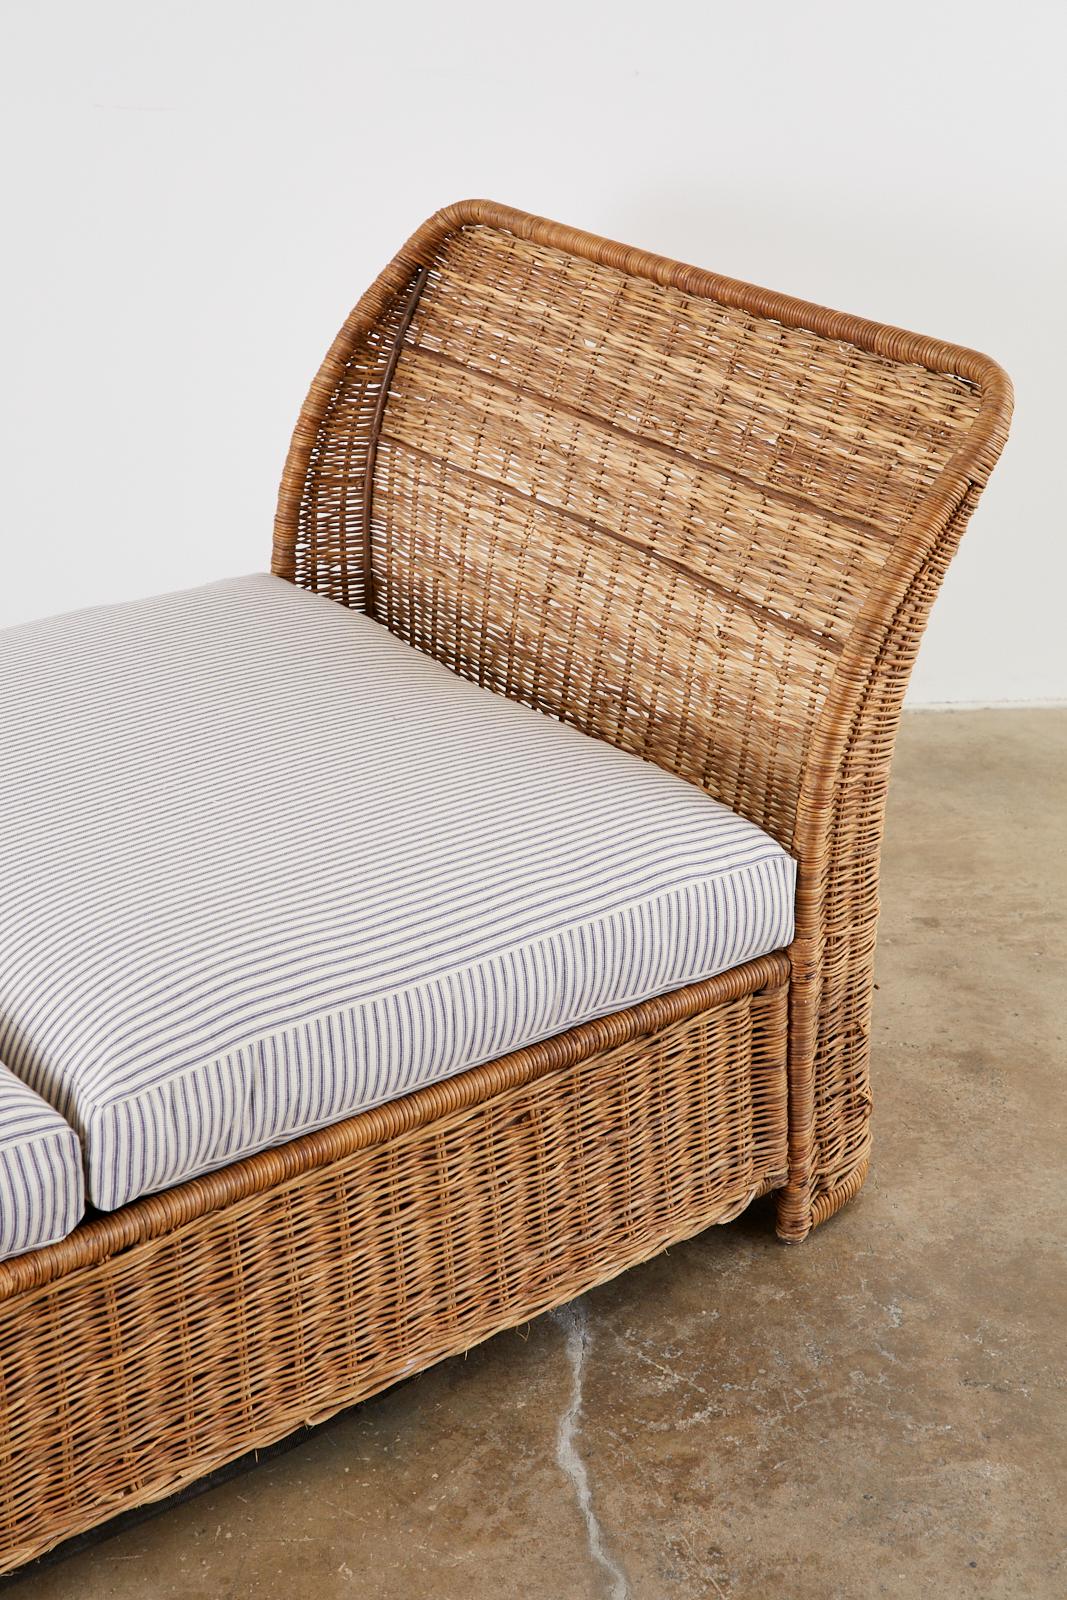 Organic Modern Style Wicker Daybed or Chaise Lounge 1